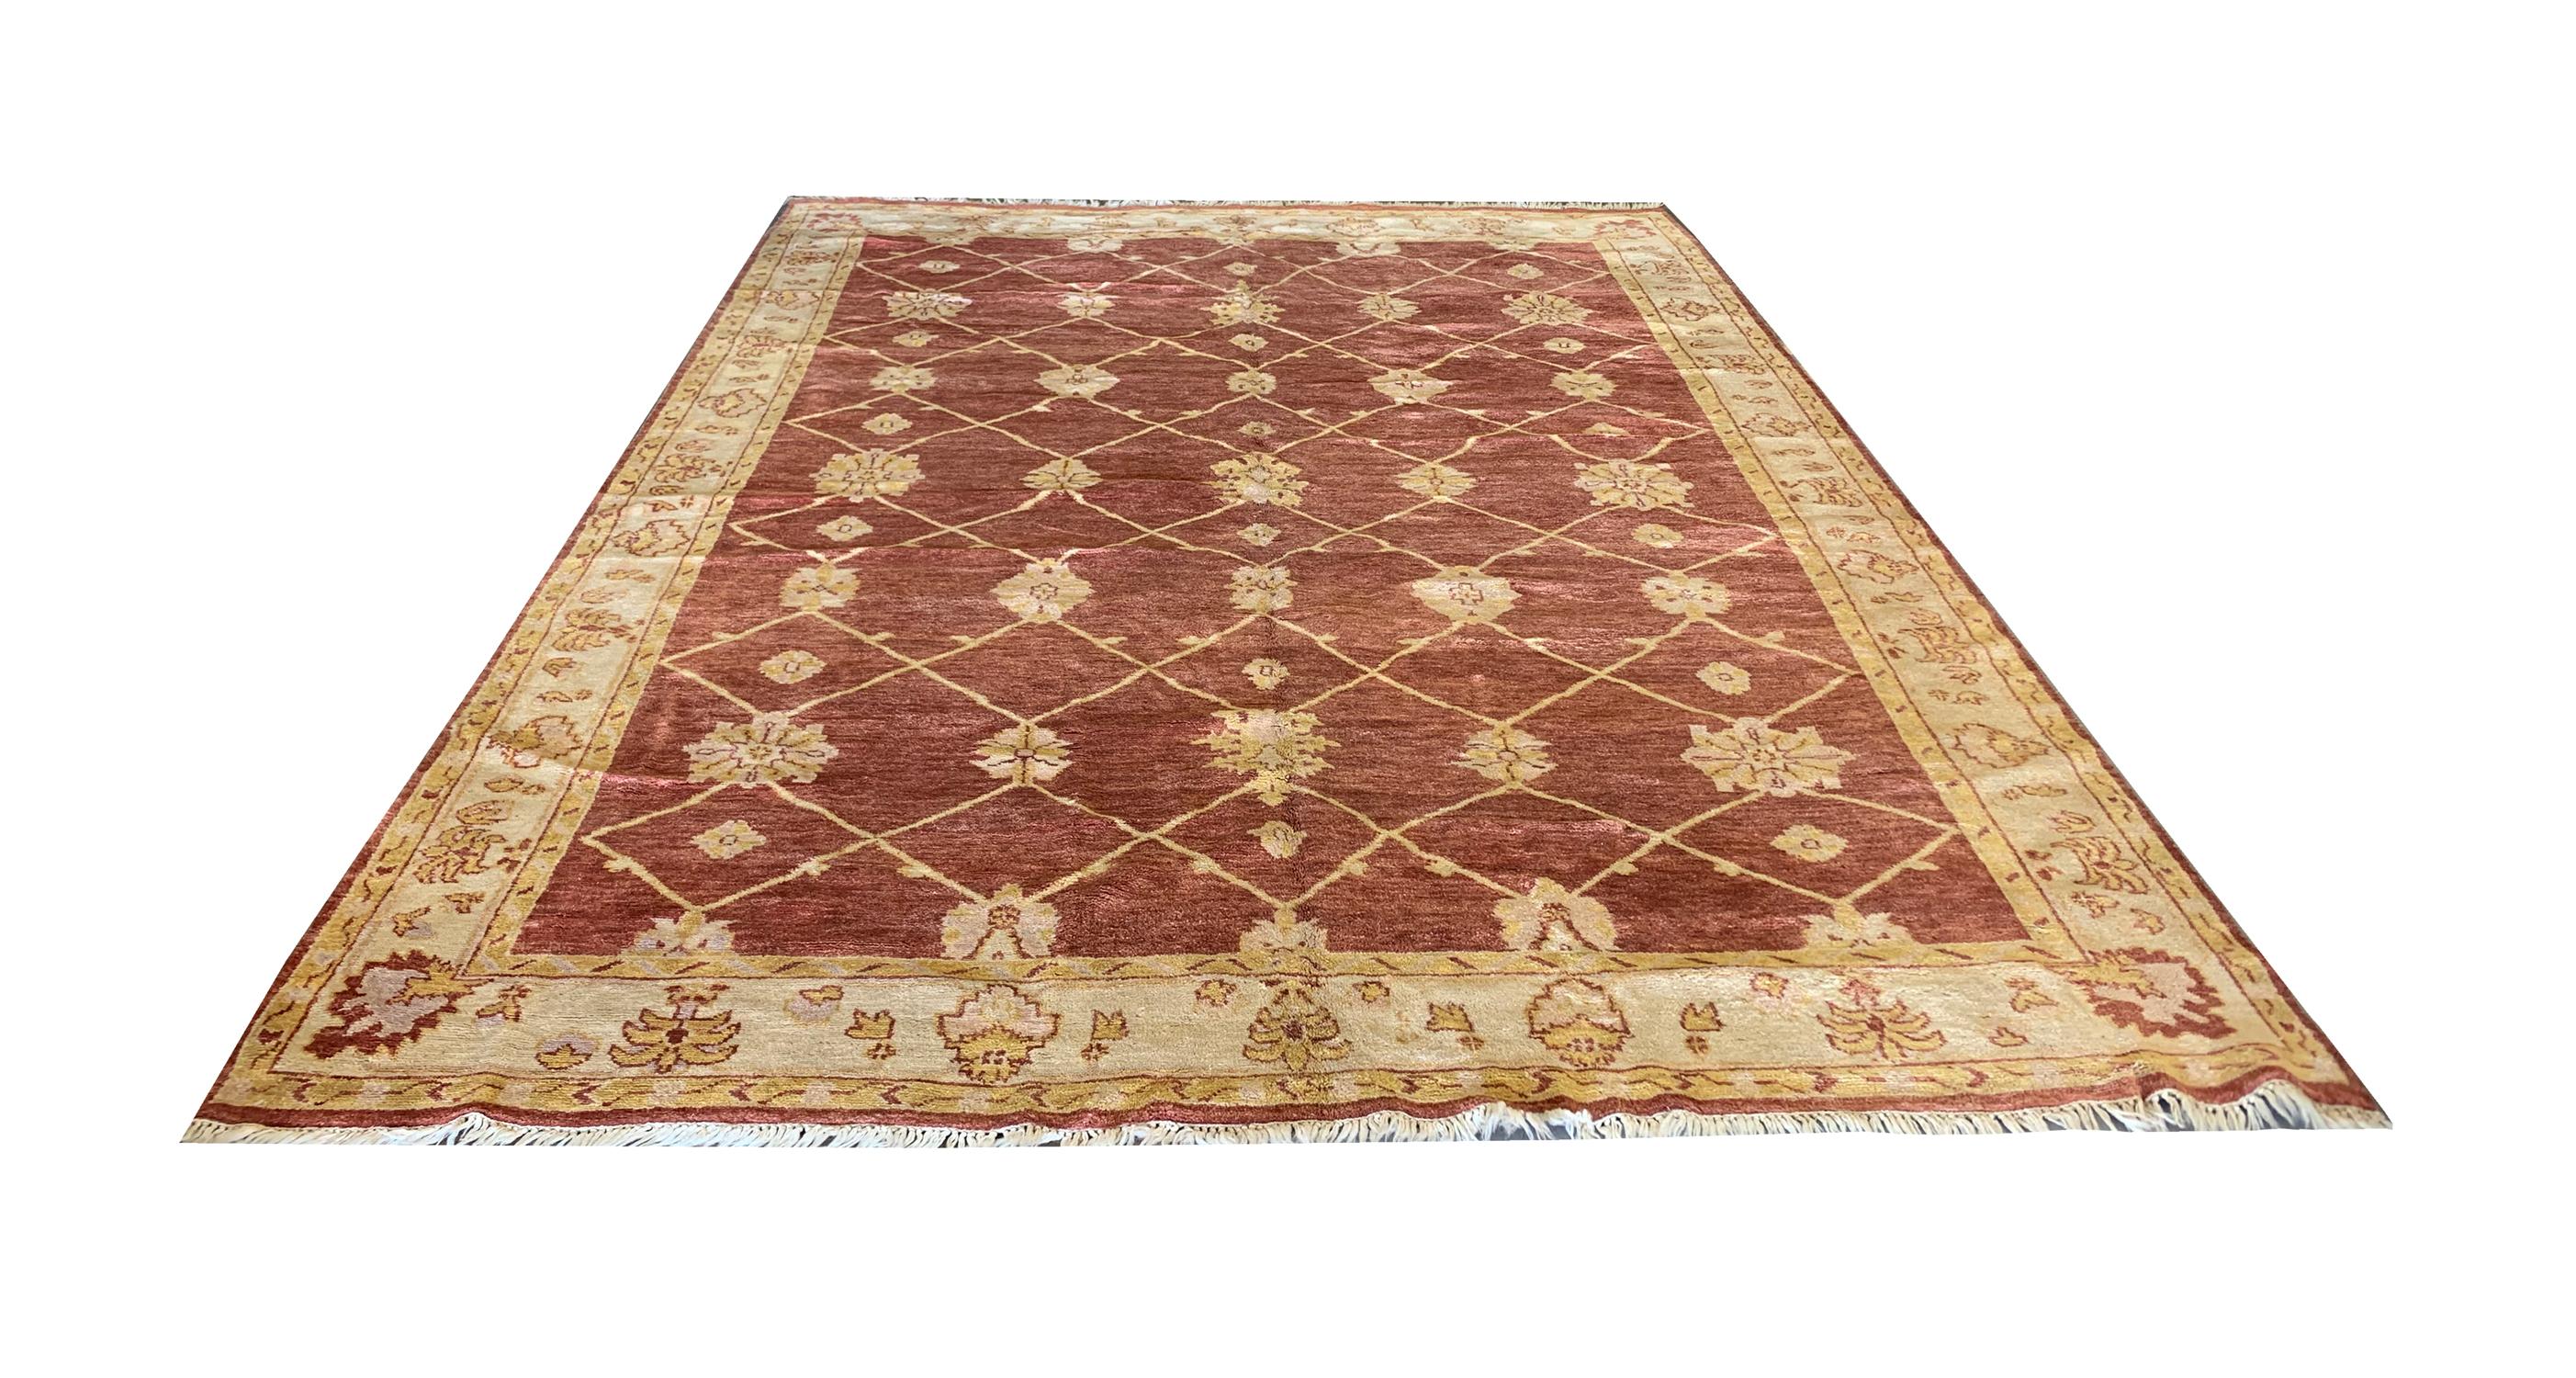 A repeating floral geometric pattern revealed in this piece is a simple yet beautiful Ziegler rug. Woven by hand in India in the 1990s, with a subtle colour palette including a brown-red background and beige-gold accents that make up the repeating